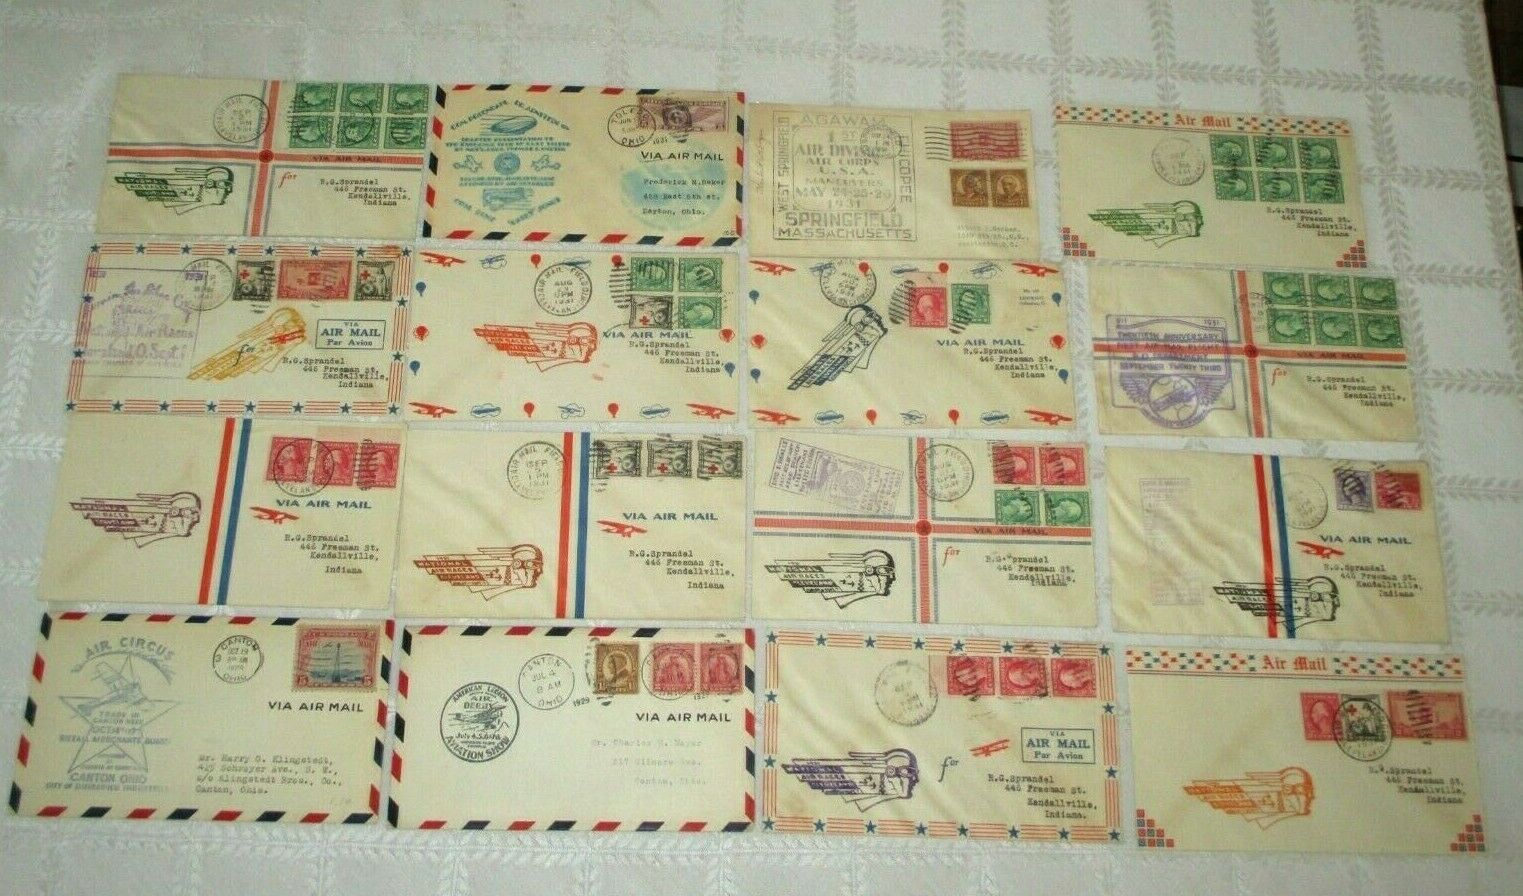 16-1929-1931-AIR-RACES-SHOWS-CORPS-CIRCUS-DERBY-STAMP COVERS-AVIATION HISTORY